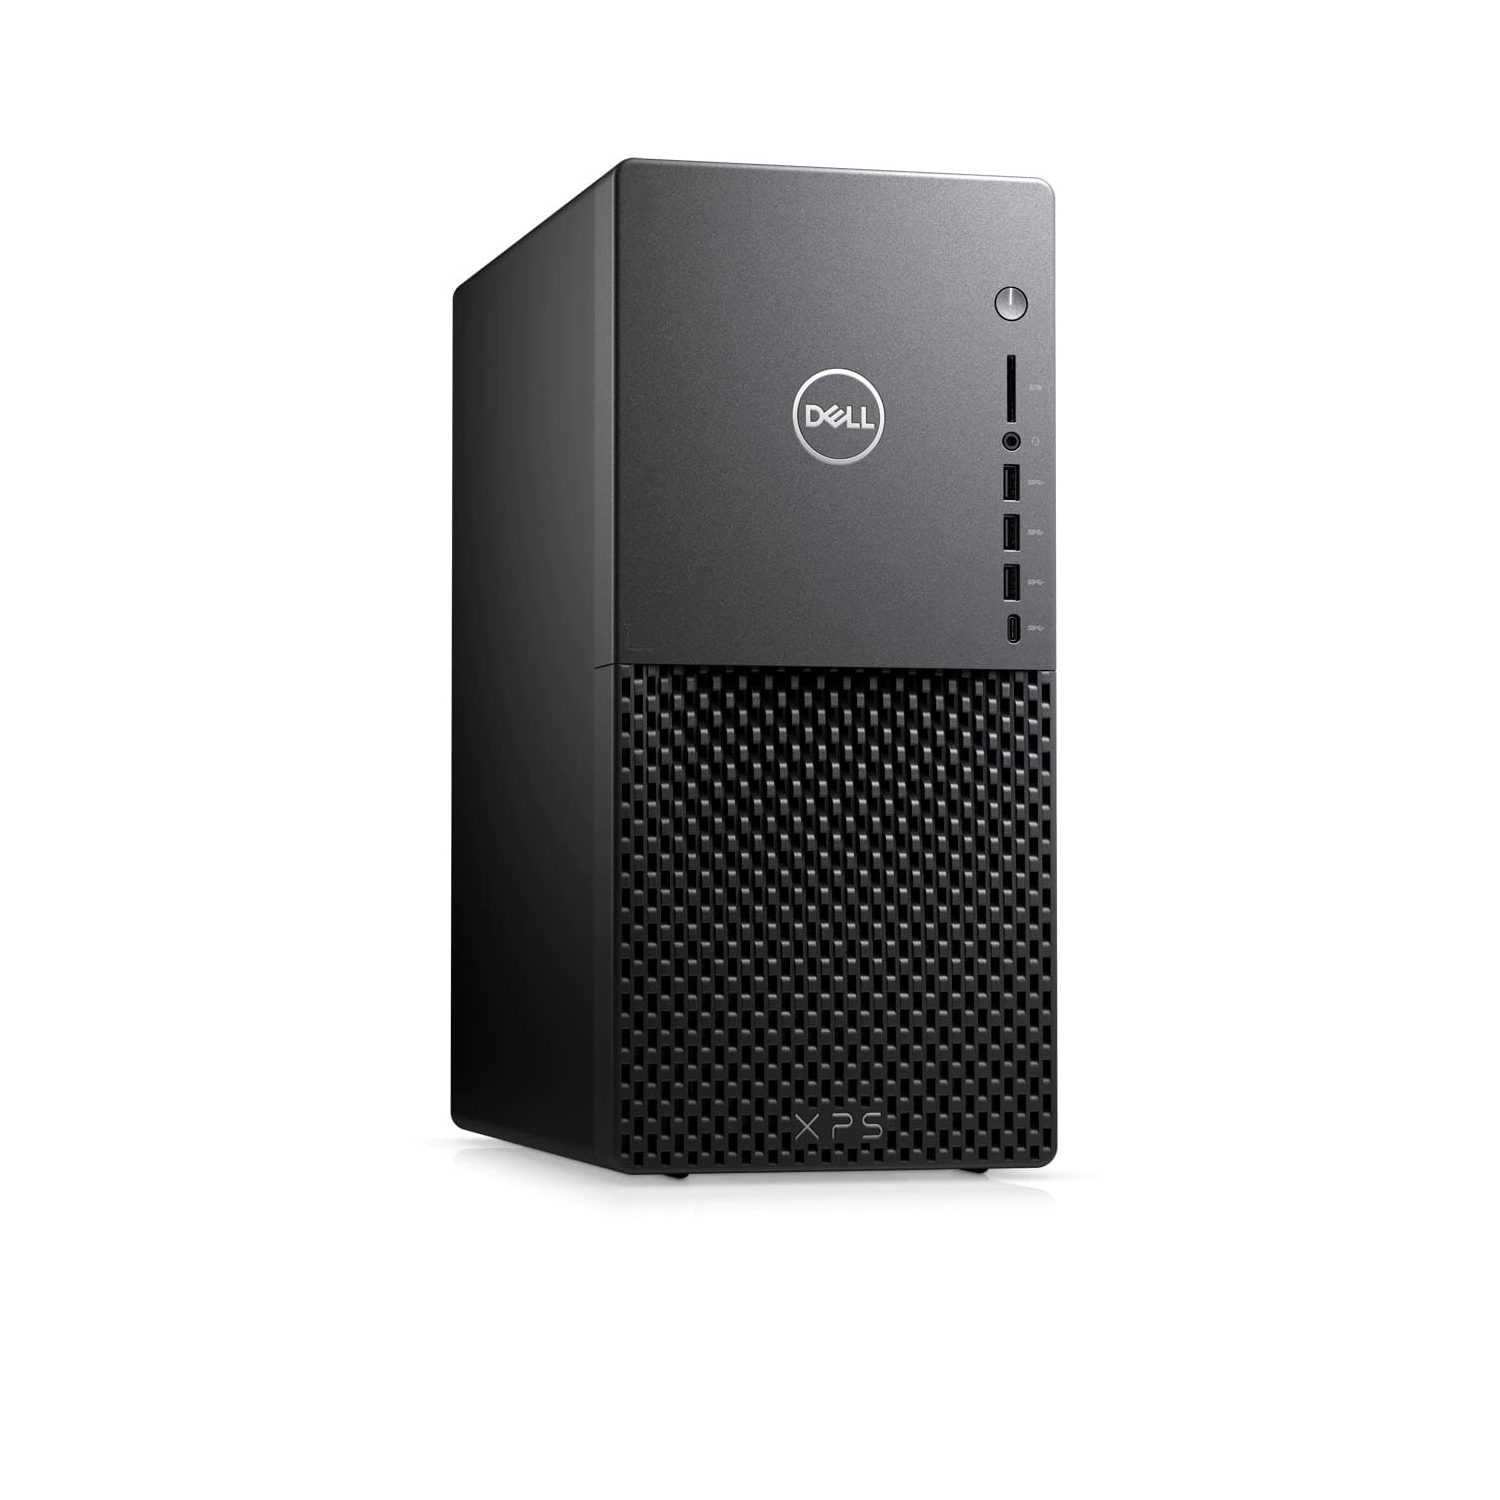 Refurbished (Excellent) - Dell XPS 8940 Desktop (2020) | Core i5 - 1TB HDD - 8GB RAM - RTX 3060 | 6 Cores @ 4.4 GHz - 11th Gen CPU Certified Refurbished